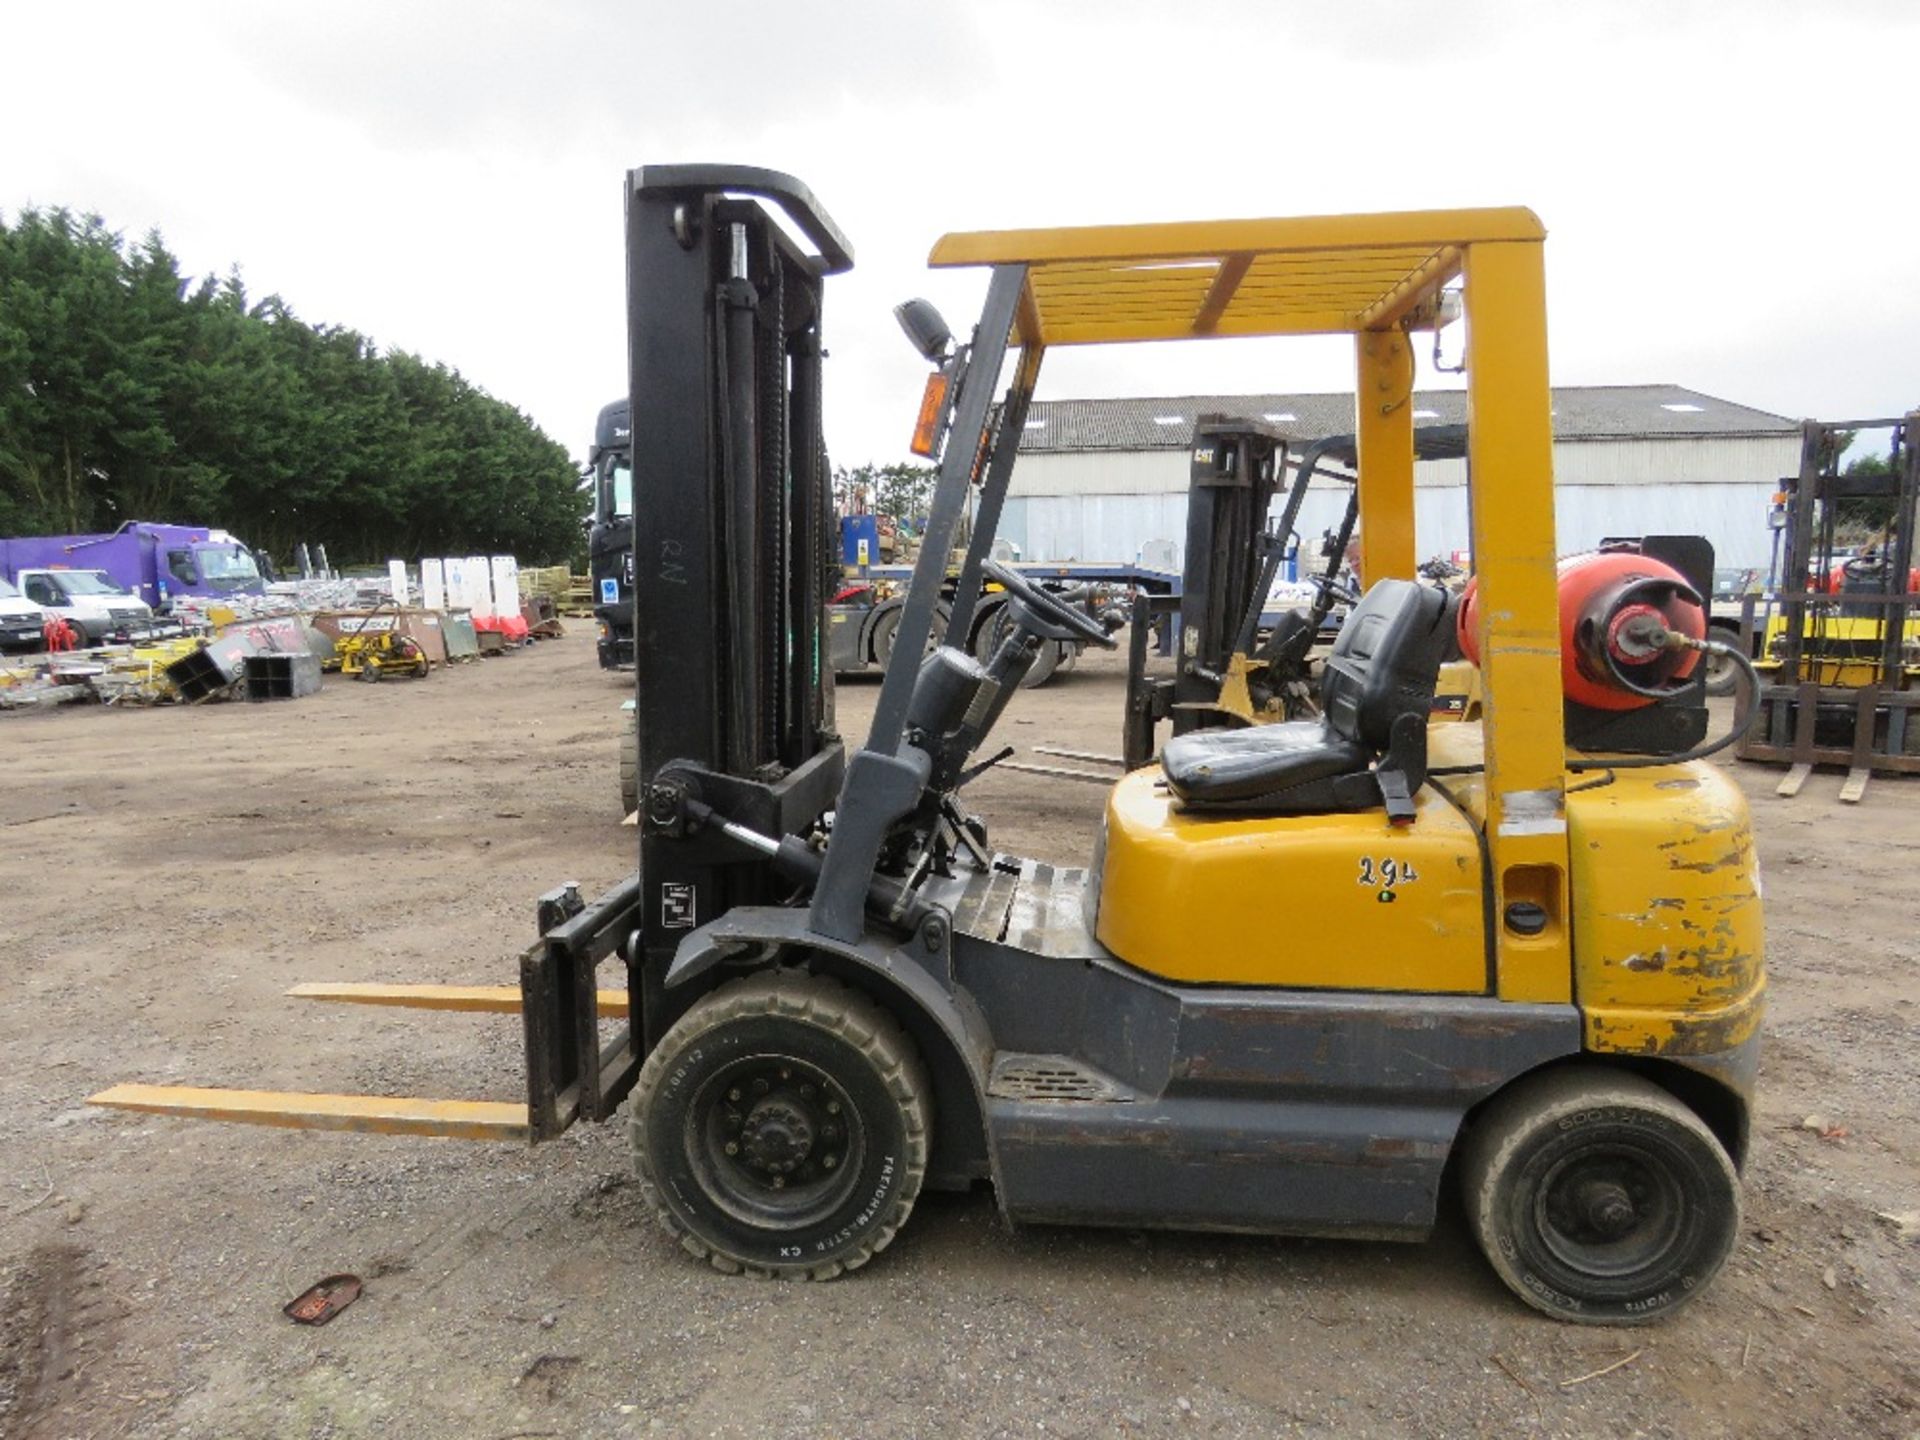 TCM FG20NST 2TONNE GAS POWERED FORKLIFT TRUCK, 8551REC HRS. 2.2M CLOSED MAST HEIGHT APPROX. WHEN TES - Image 5 of 12